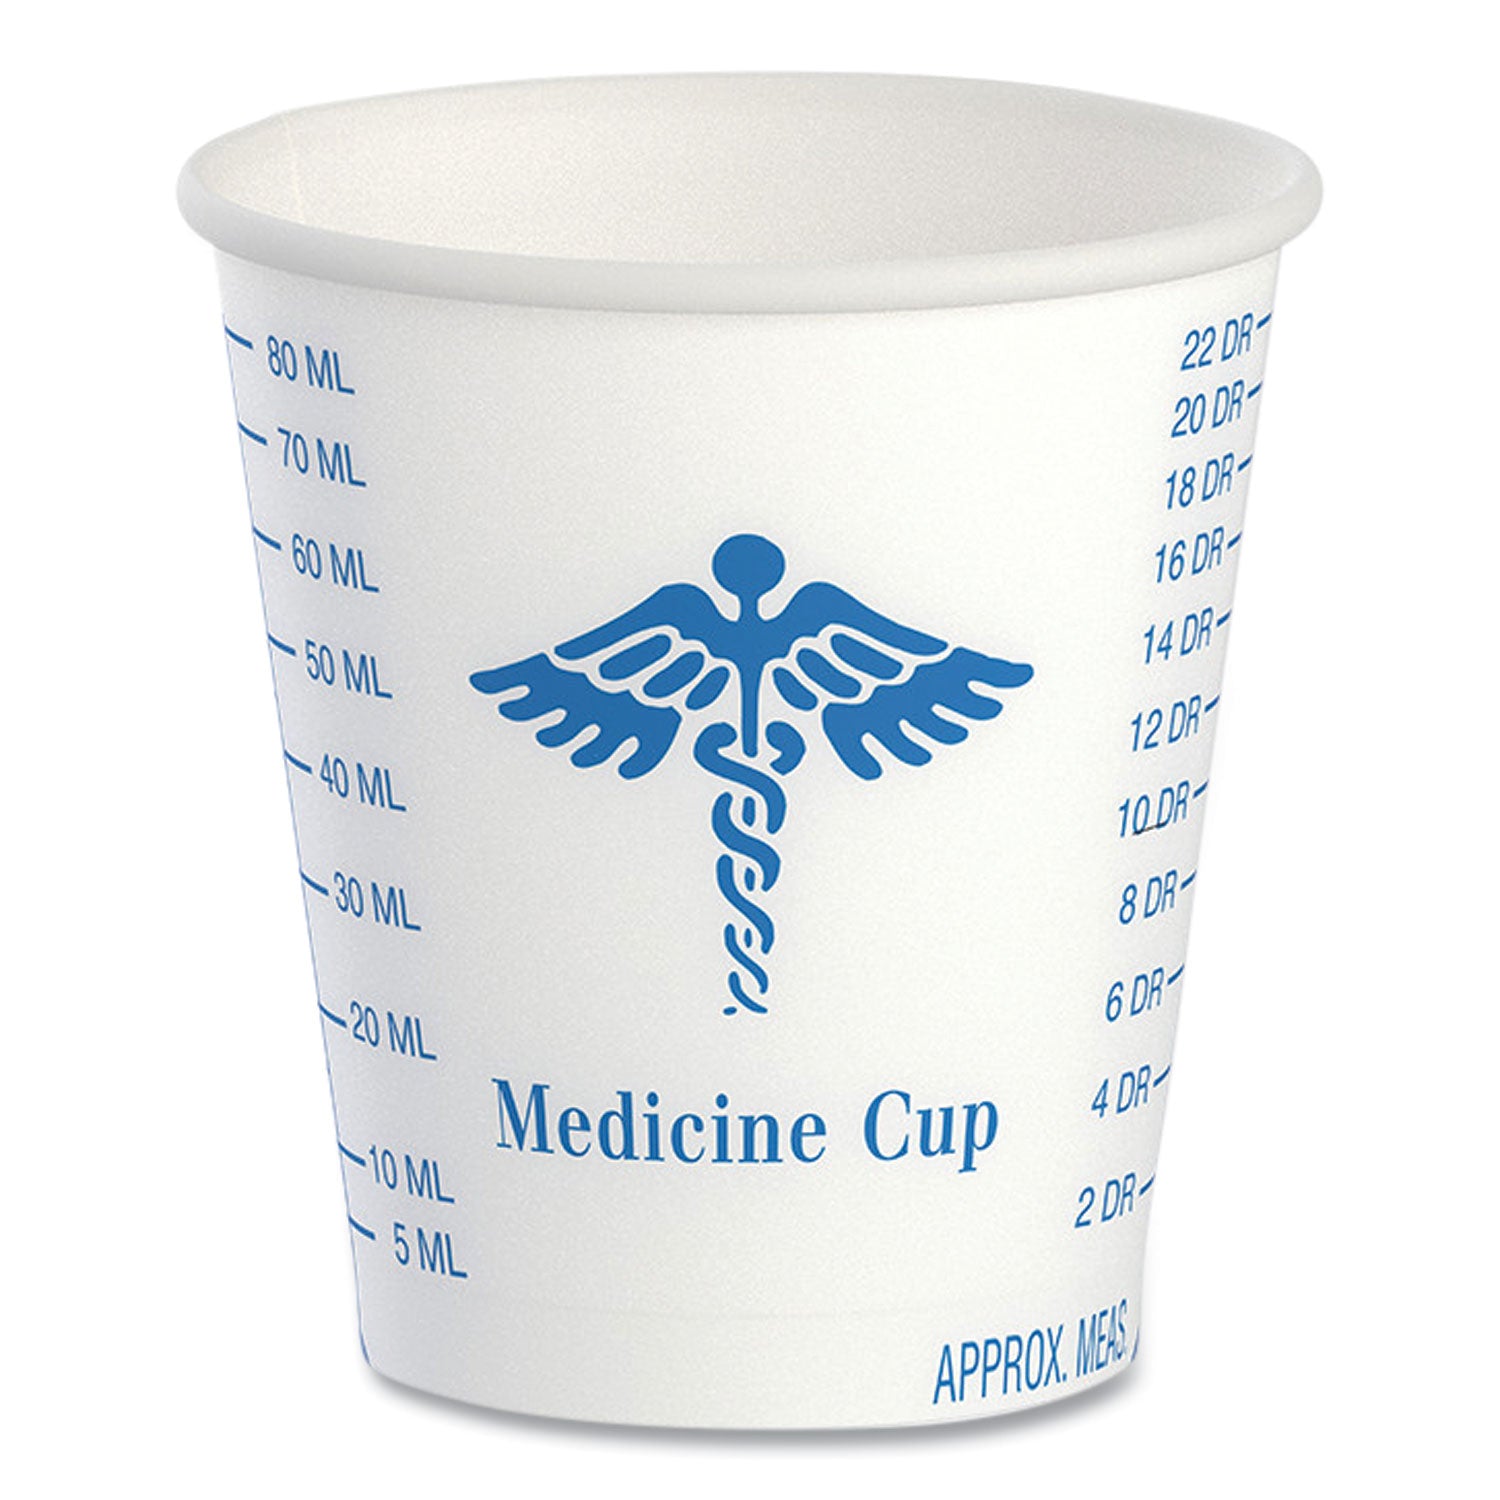 Paper Medical and Dental Graduated Cups, ProPlanet Seal, 3 oz, White/Blue, 100/Bag, 50 Bags/Carton - 